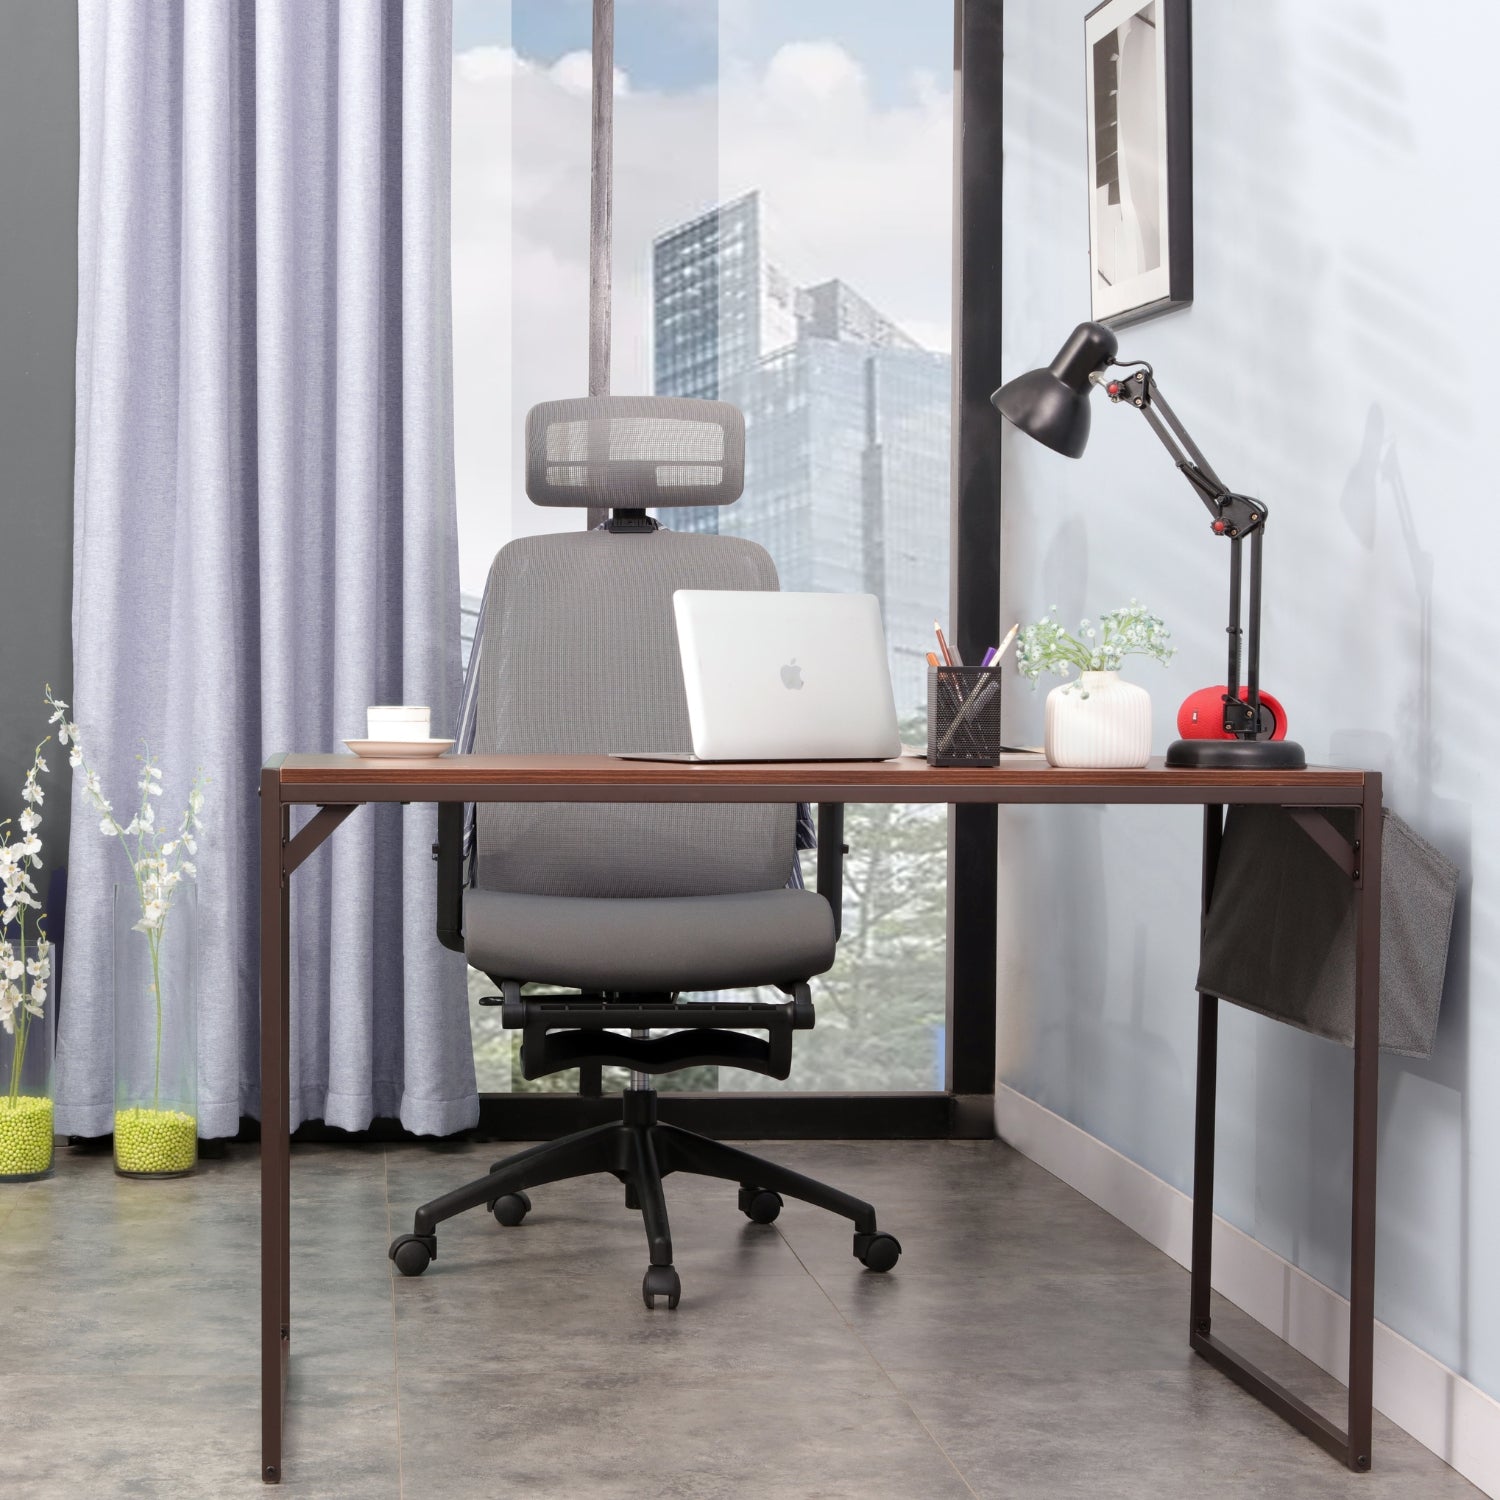 A desk with a laptop and grey Kyona ergonomic chair in front of a window.